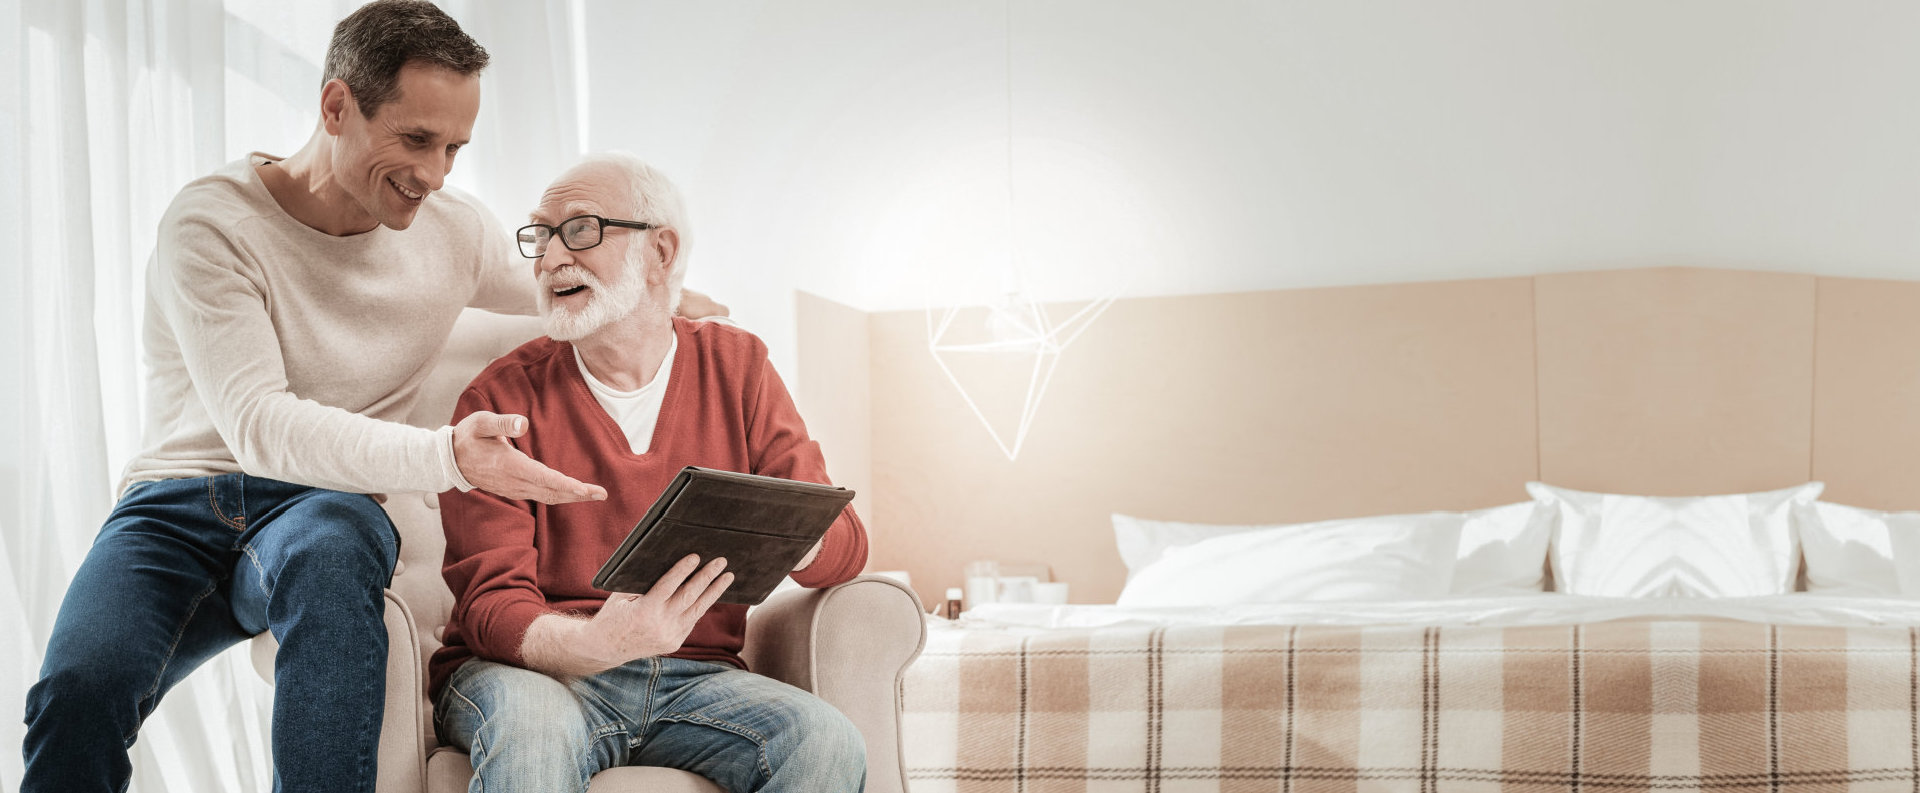 elderly man browsing his tablet with another man